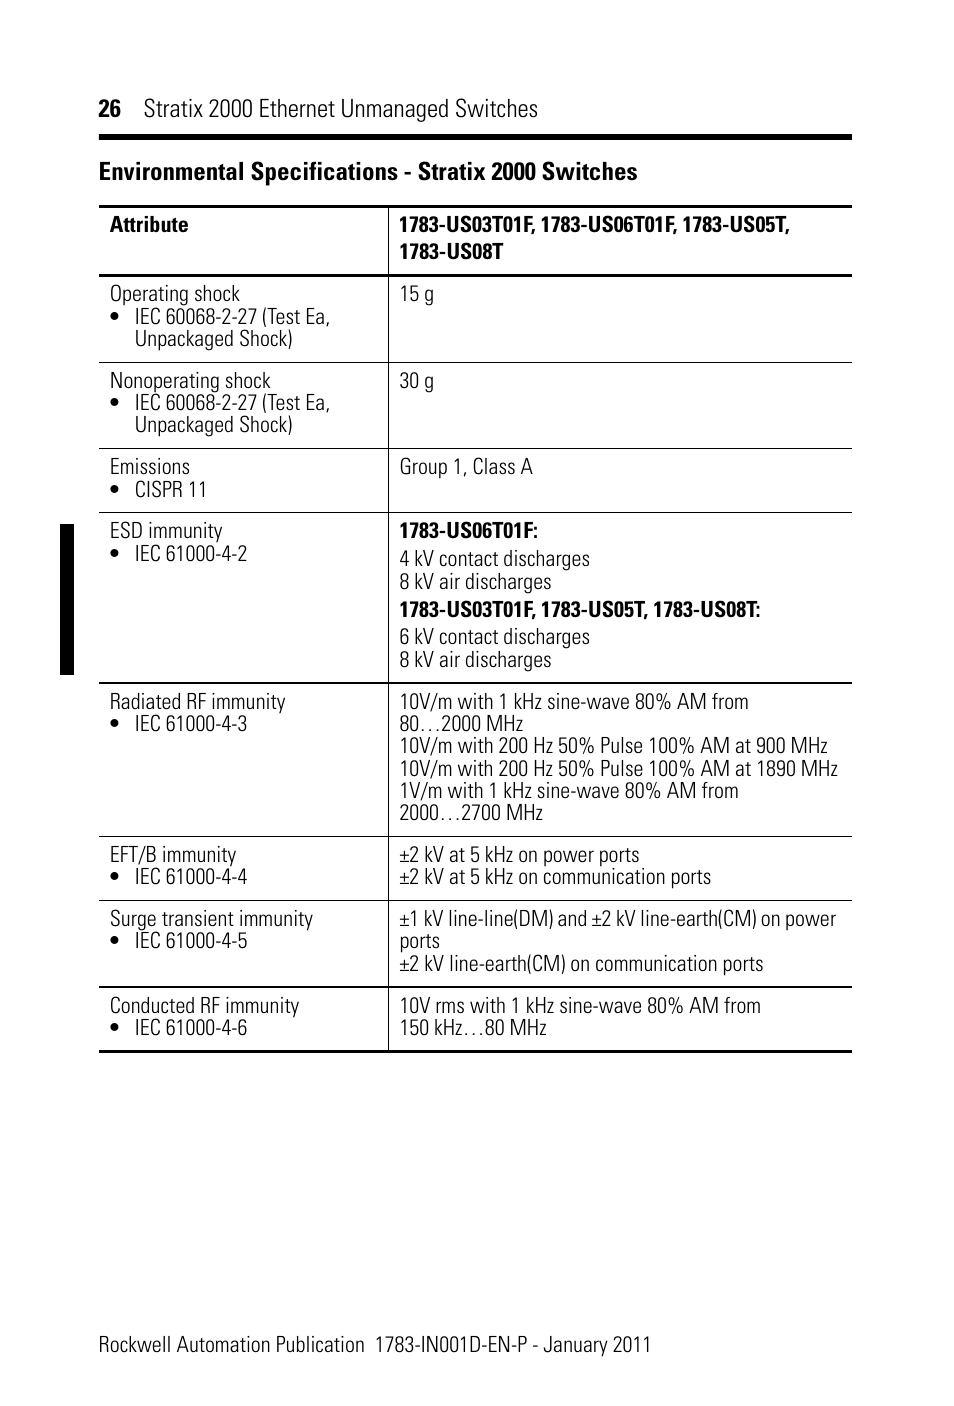 Rockwell Automation 1783-US08T Stratix 2000 Ethernet Unmanaged Switch Installation Instructions User Manual | Page 26 / 28